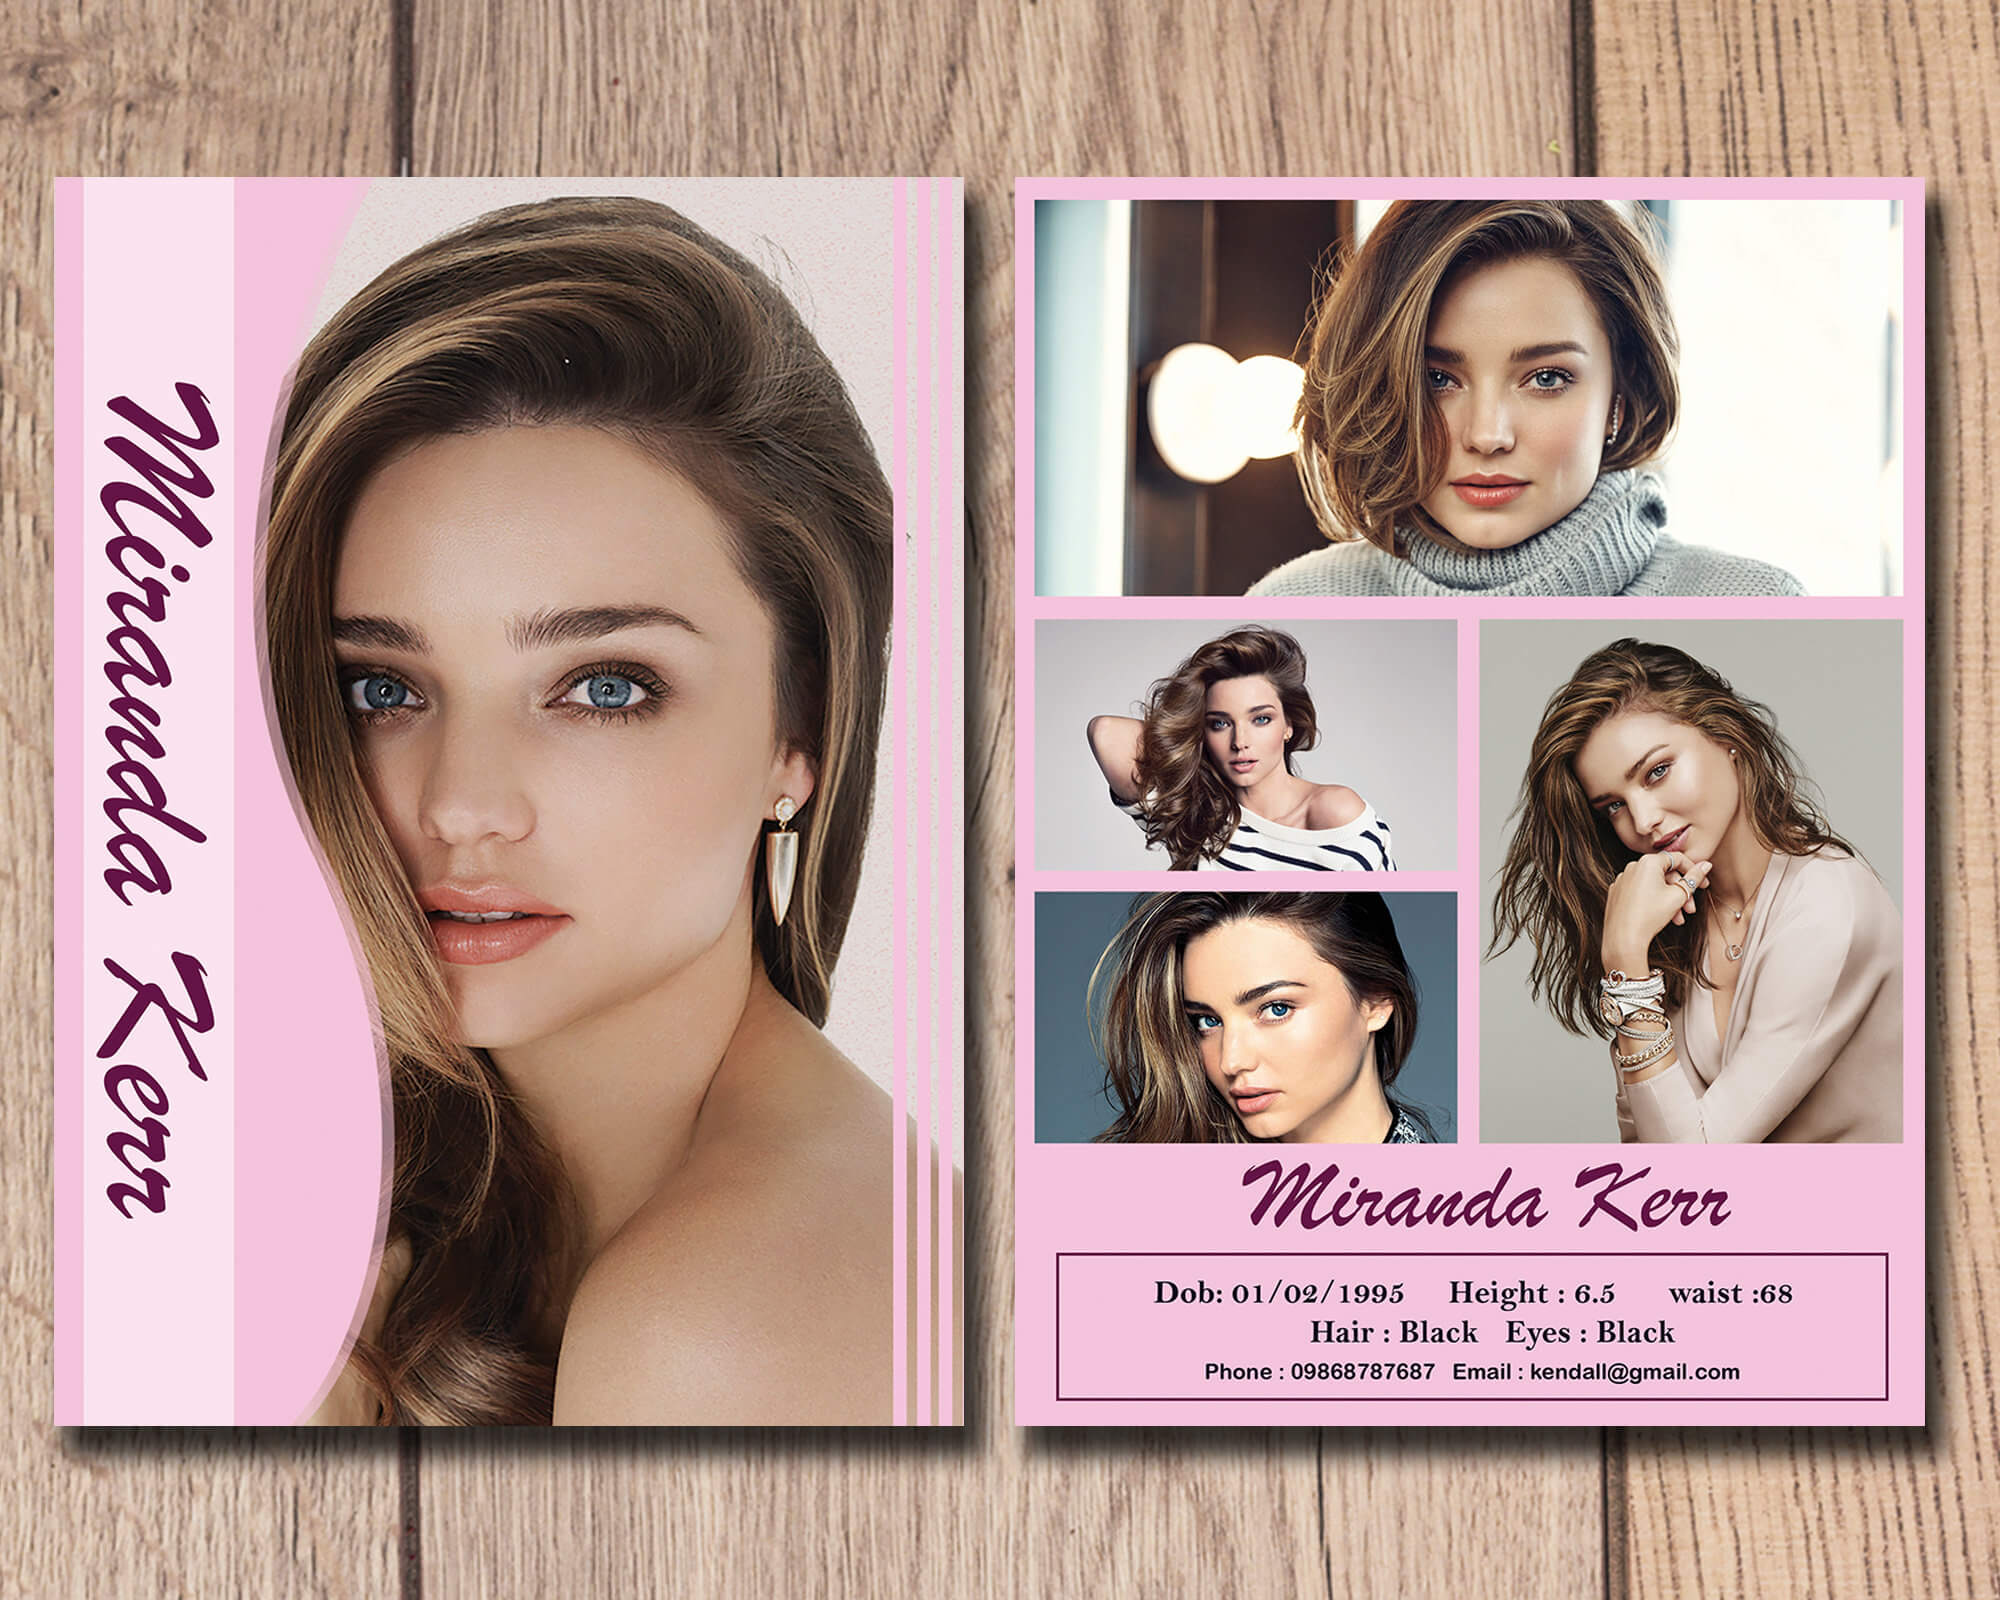 028 Model Comp Card Template Ideas Outstanding Photoshop Psd With Free Model Comp Card Template